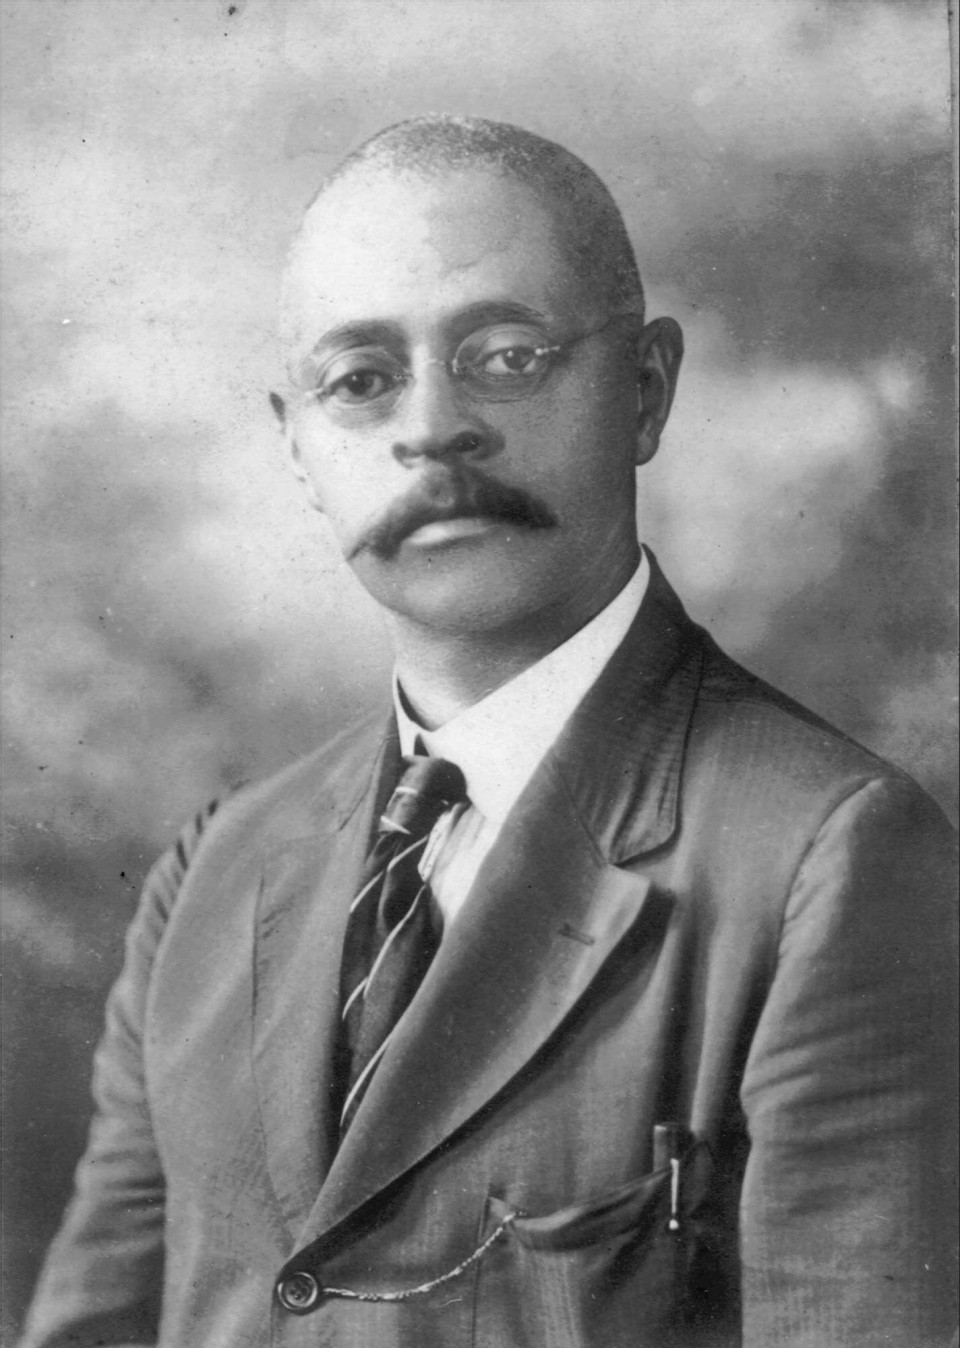 Dr. Thomas Leroy Jefferson was the man Blacks turned to for medical care in the Palm Beaches at the turn of the century. He was the first medical doctor in the area and practiced for 40 years.